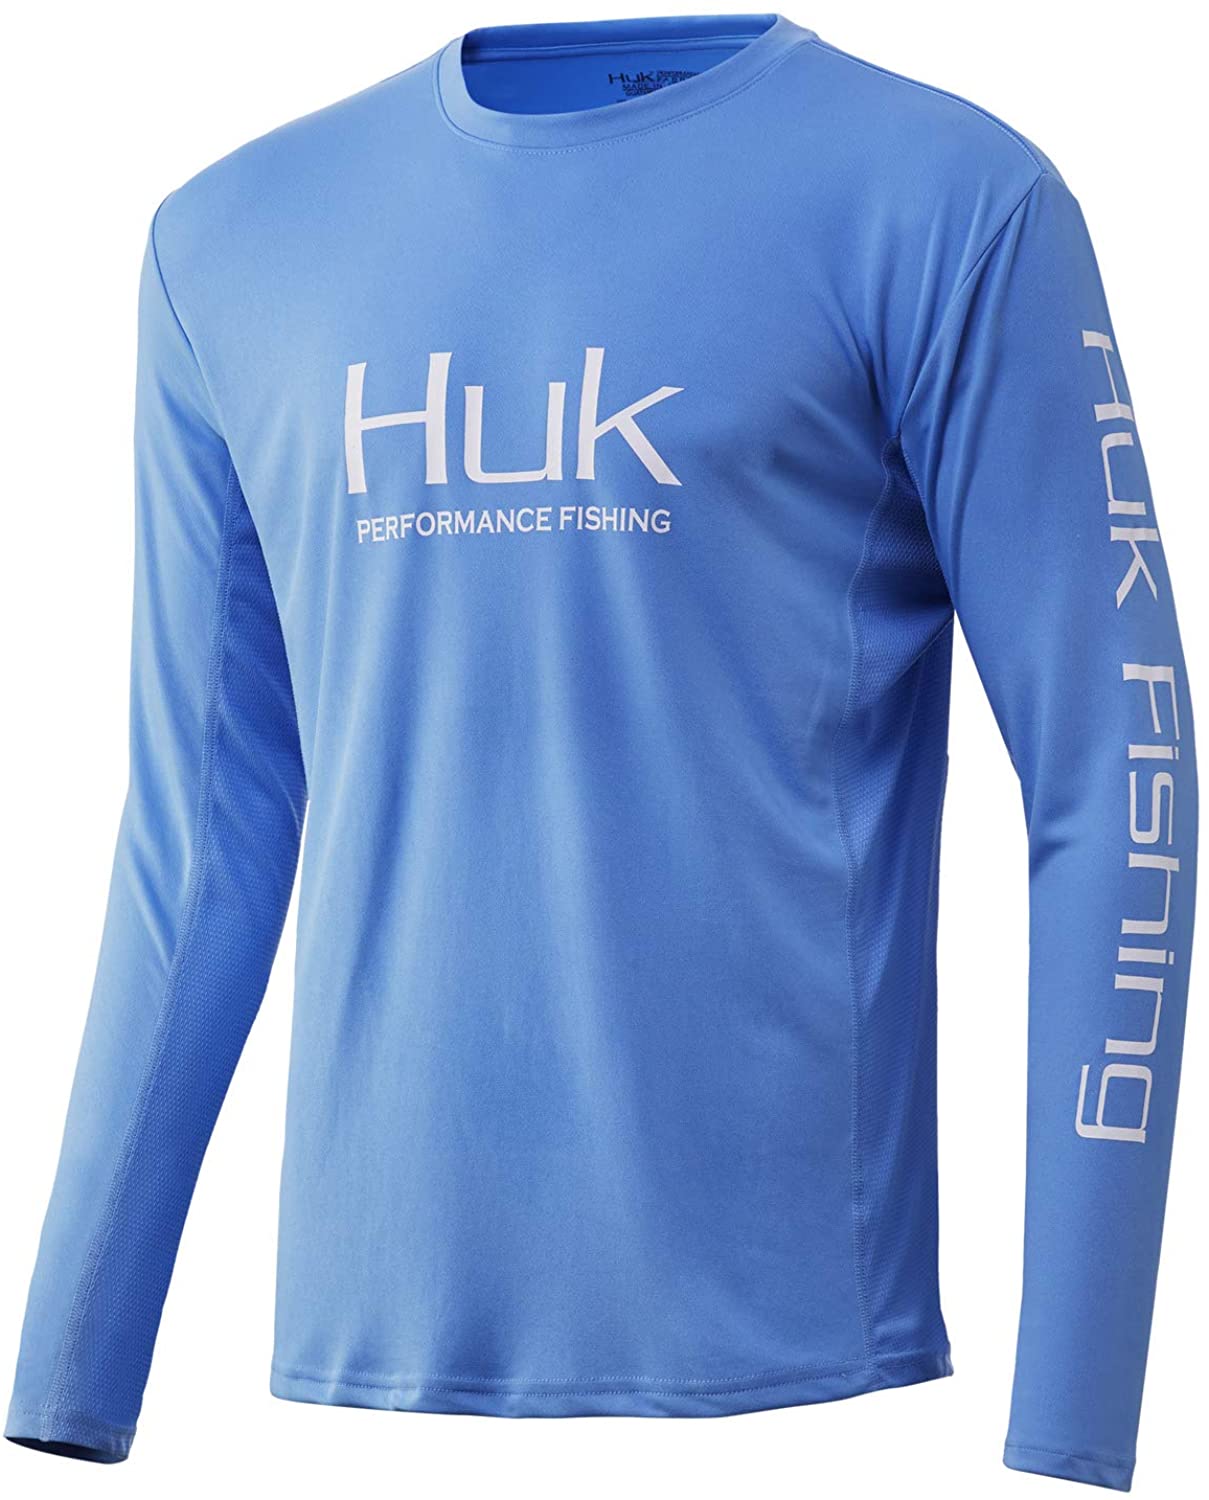 Men's Huk Icon X Long Sleeve Shirt in Carolina Blue from the front